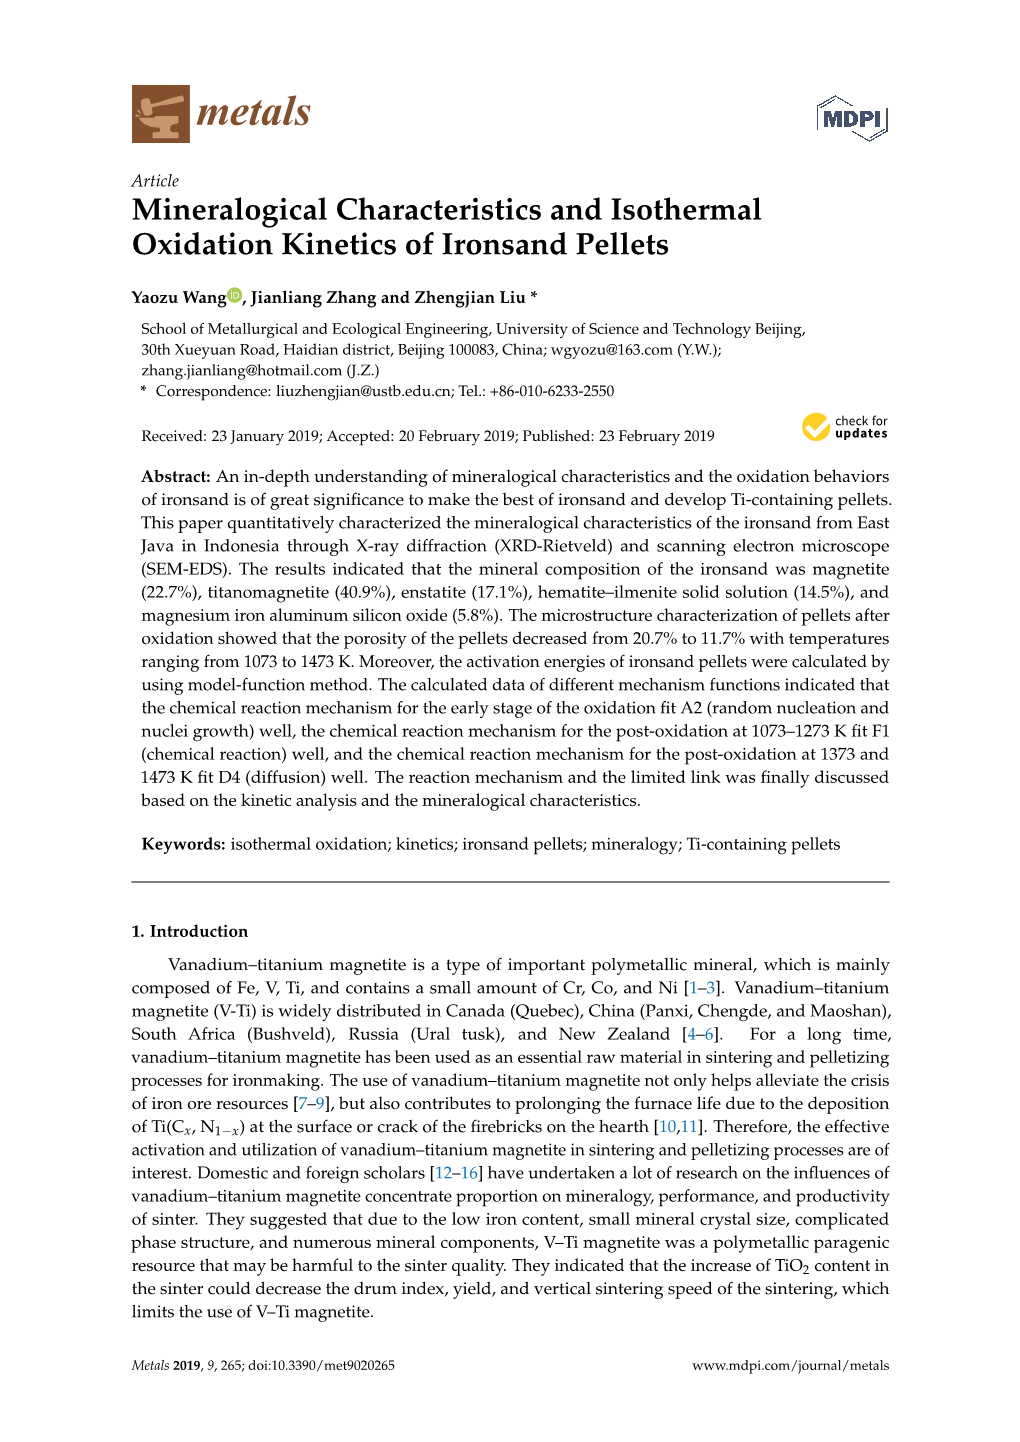 Mineralogical Characteristics and Isothermal Oxidation Kinetics of Ironsand Pellets